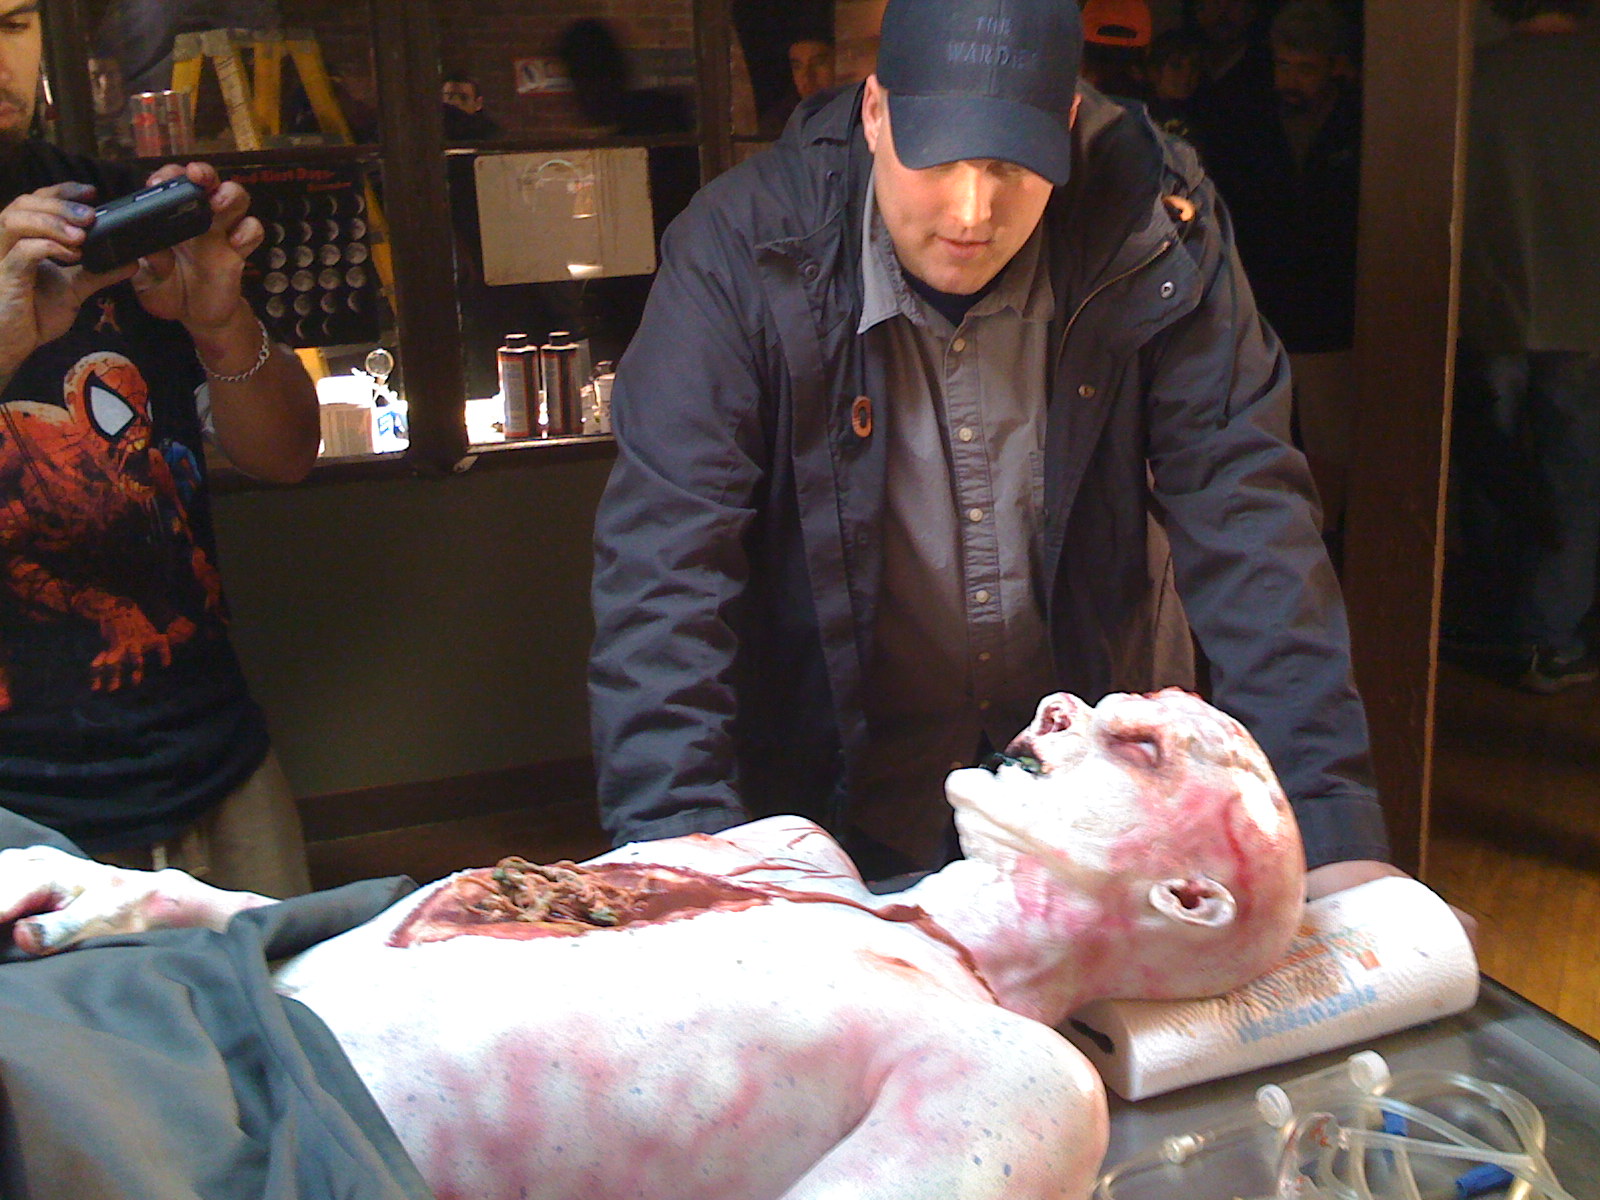 Matthew Bolton speaking with Wes Raitt the Ghoul in the TV Pilot, 